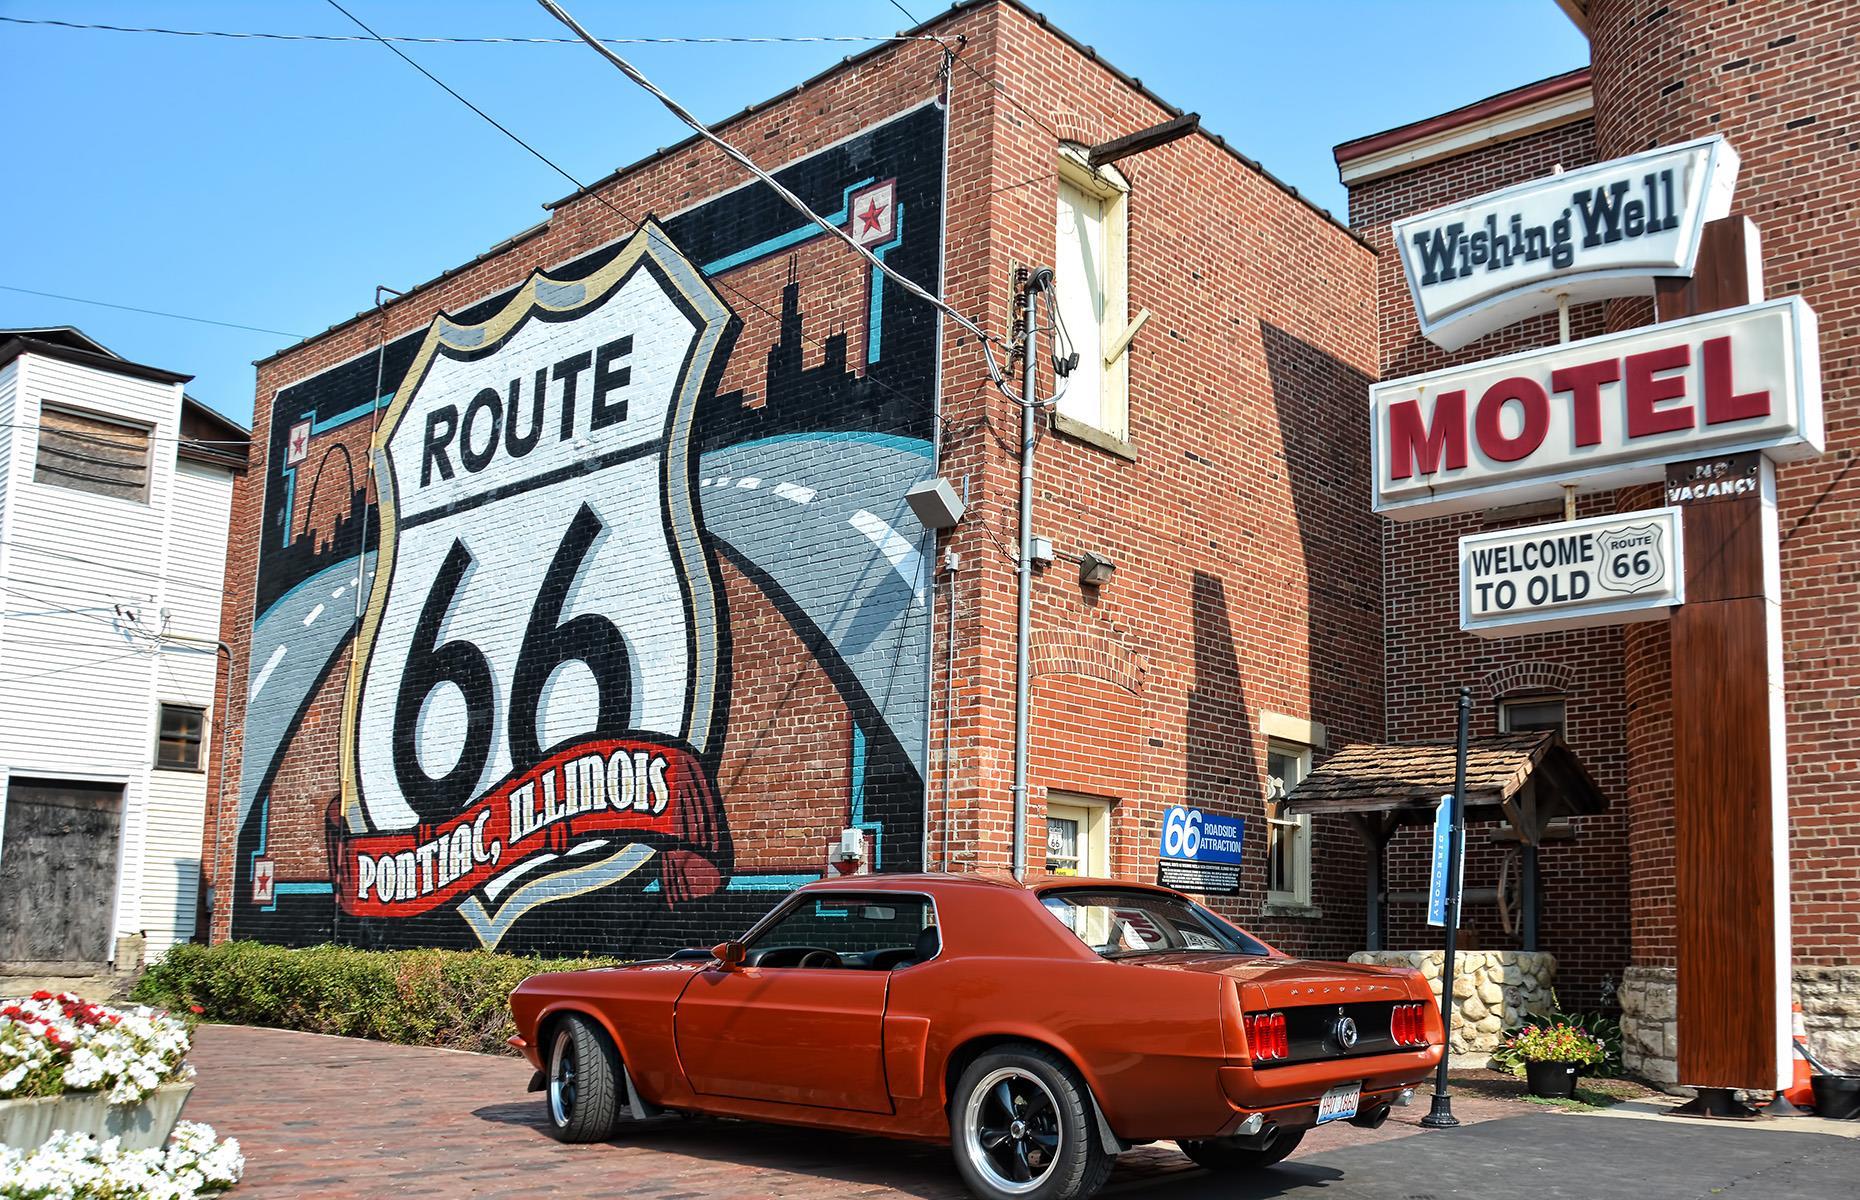 <p>The famed Route 66 sign downtown is a favored photo stop in Chicago, and then the sights and sounds of the city dissolve into the open road. Pontiac’s Illinois Route 66 Hall of Fame and Museum (pictured) is around 100 miles (161km) in, and comes crammed with memorabilia relating to “Mother Road”. Farther on, Springfield has kitsch slices of Americana like the Cozy Dog Drive In, a drive-in that doubles up as a Route-66-museum. The final stop is Collinsville, close to the Cahokia Mounds State Historic Site.</p>